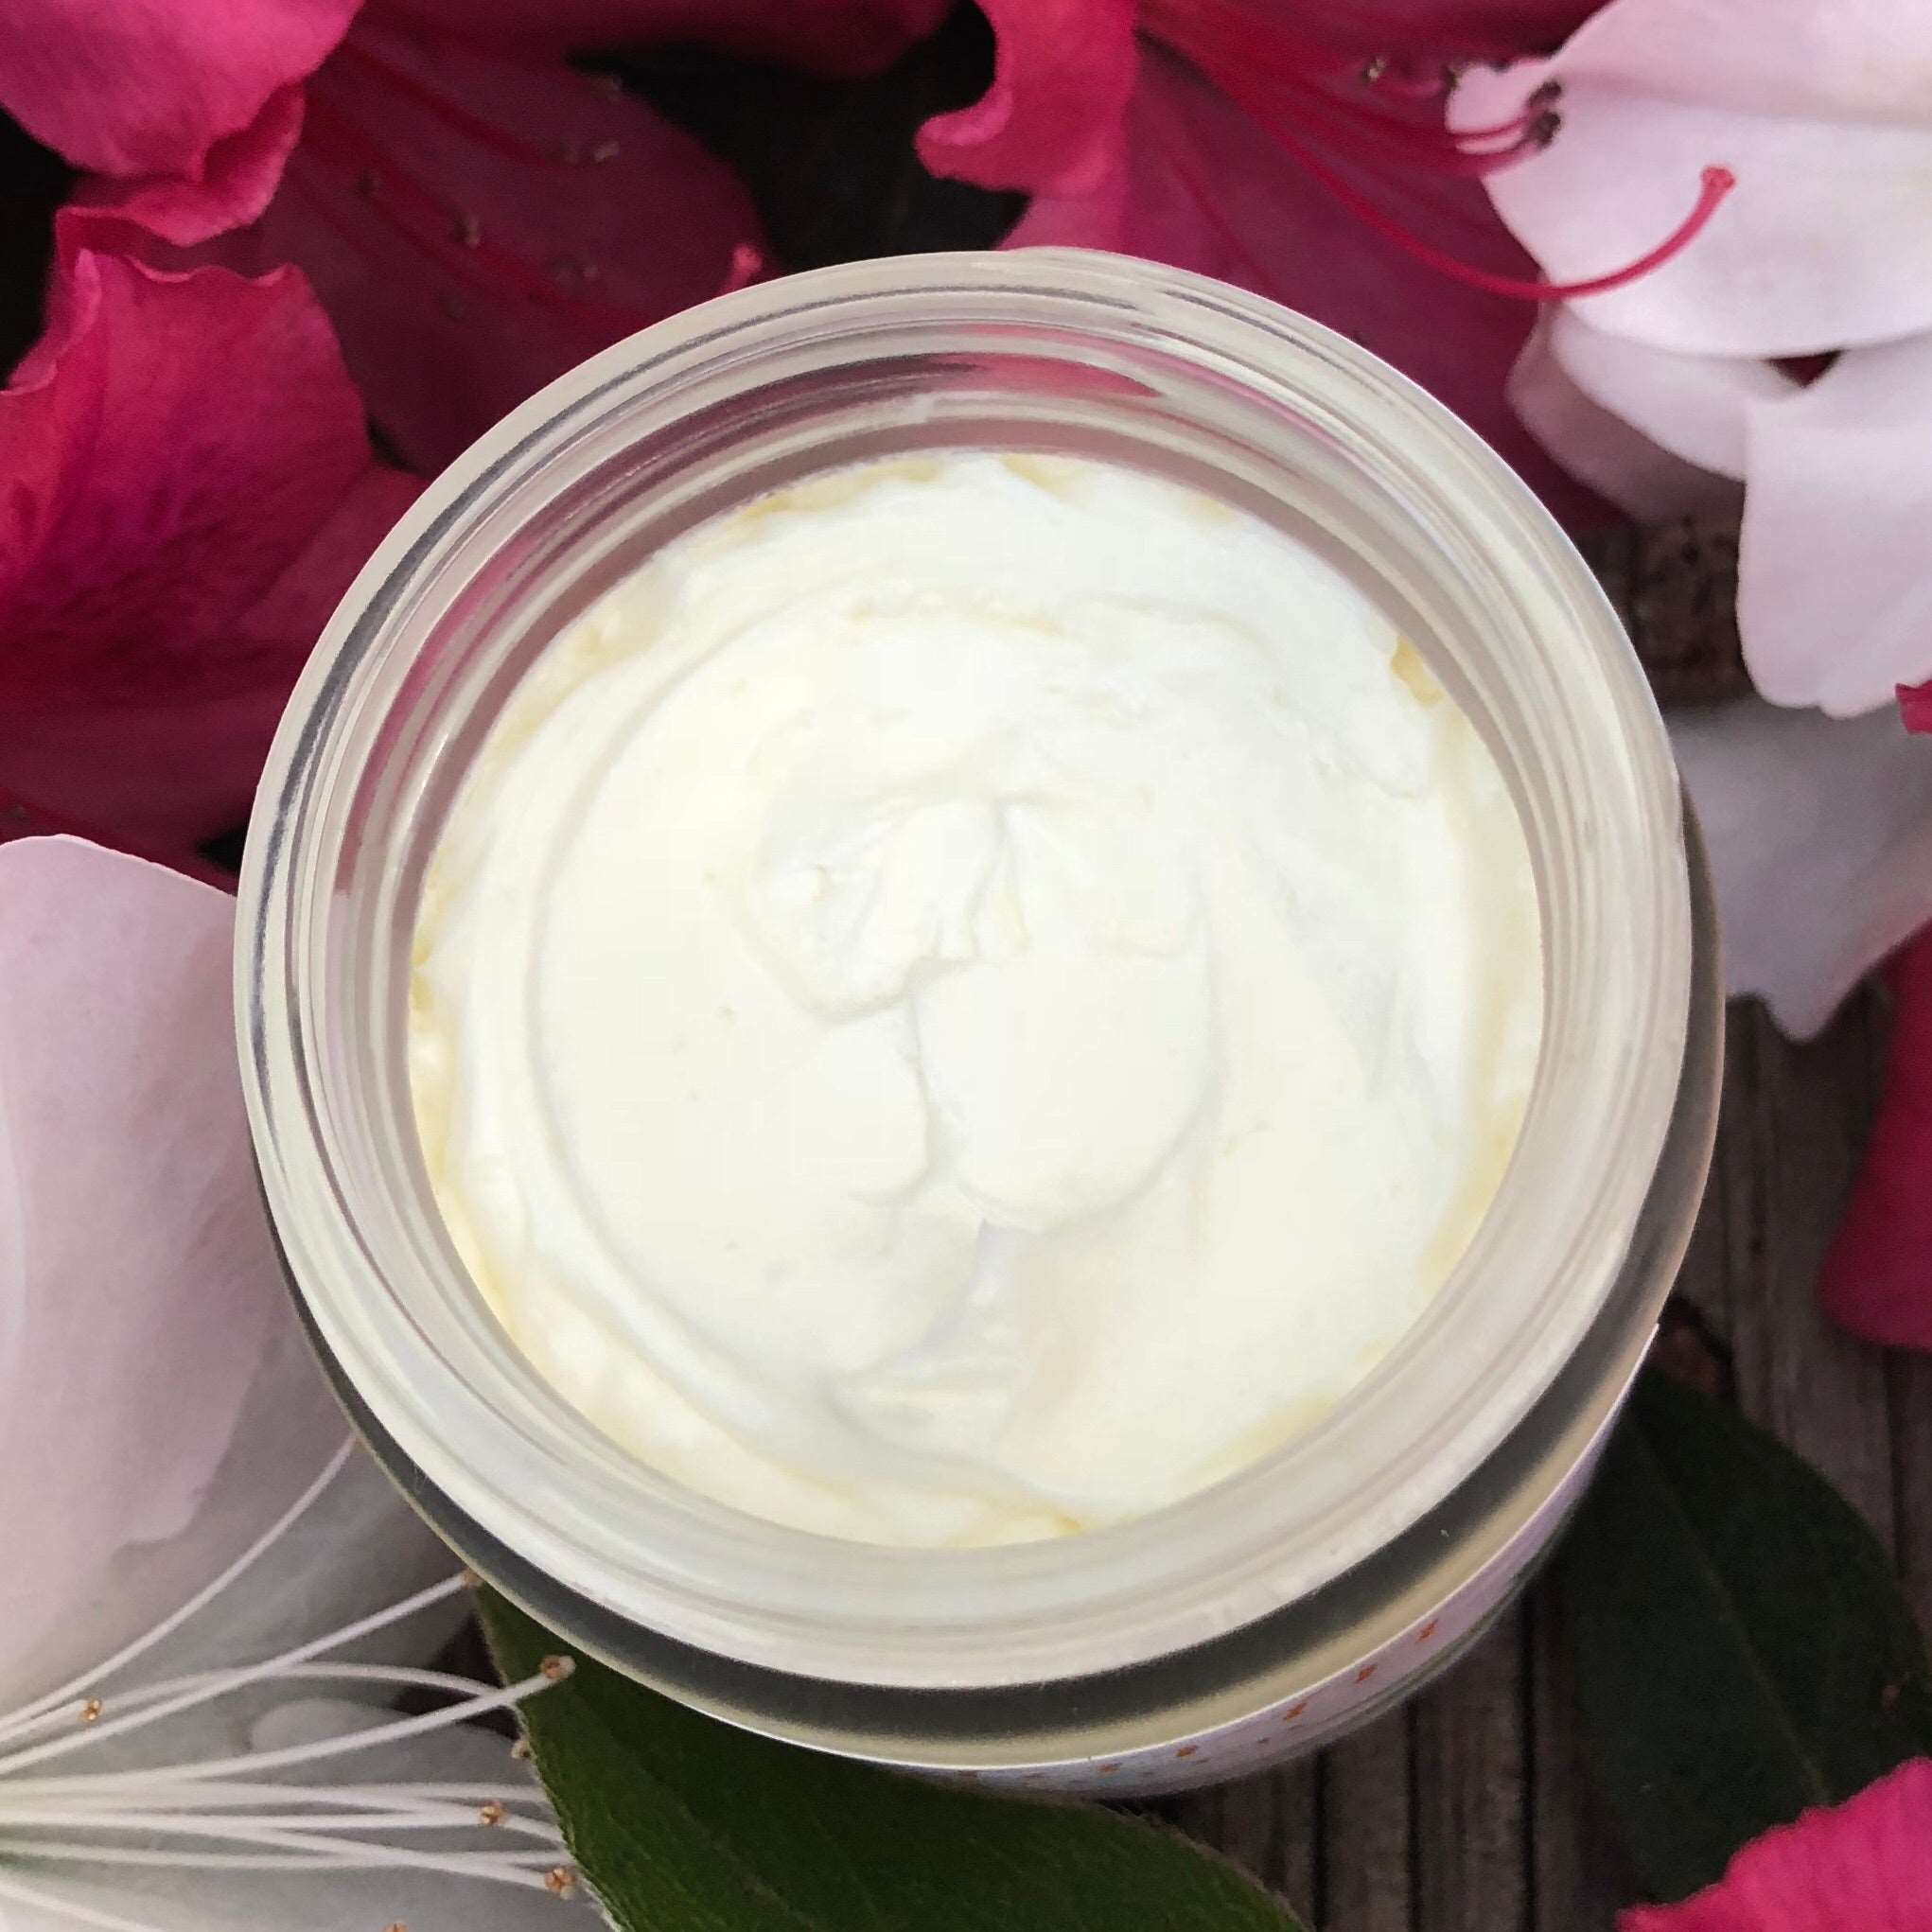 Simply is a great choice for people with very sensitive skin and conditions including severe eczema and psoriasis.  This all natural body butter has been kept simple with no added scent.  Also great on babies!  This natural handmade body butter makes skin silky soft! It is made of top quality raw ingredients from around the world making it completely unique and high grade. It moisturizes, nourishes and regenerates your skin to promote a healthy and radiant glow! 